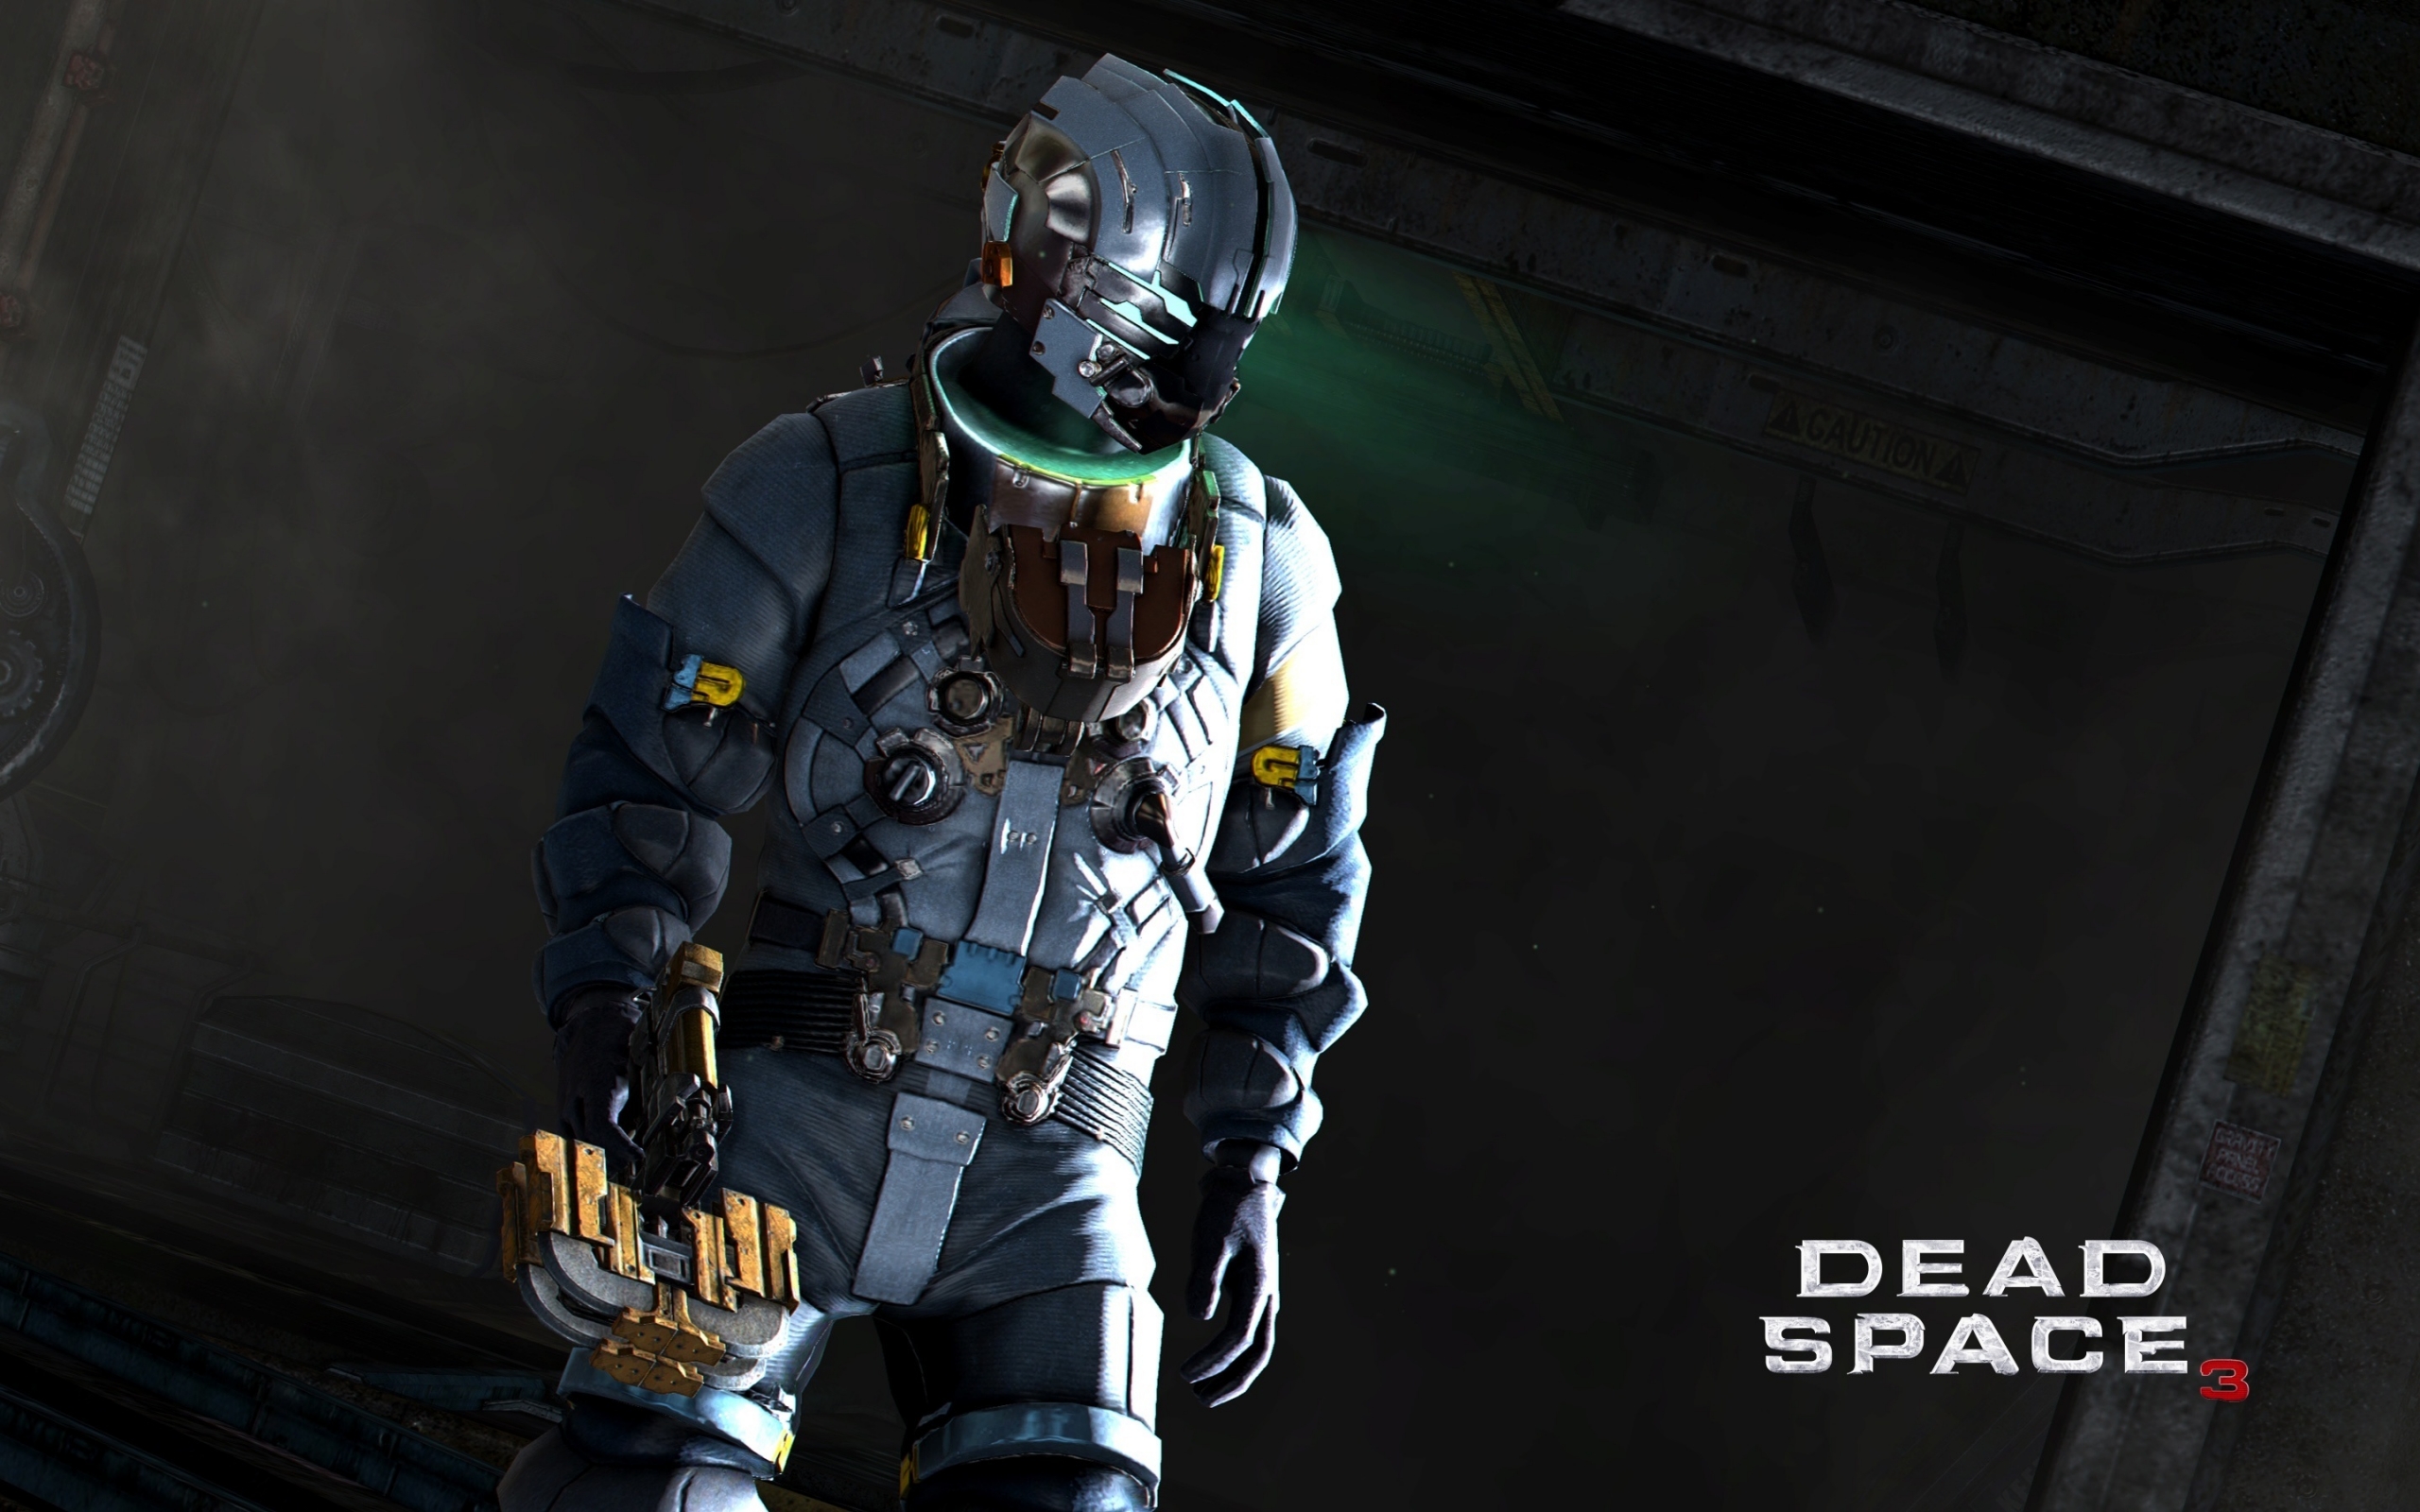 Dead Space 3 Costume for 2560 x 1600 widescreen resolution